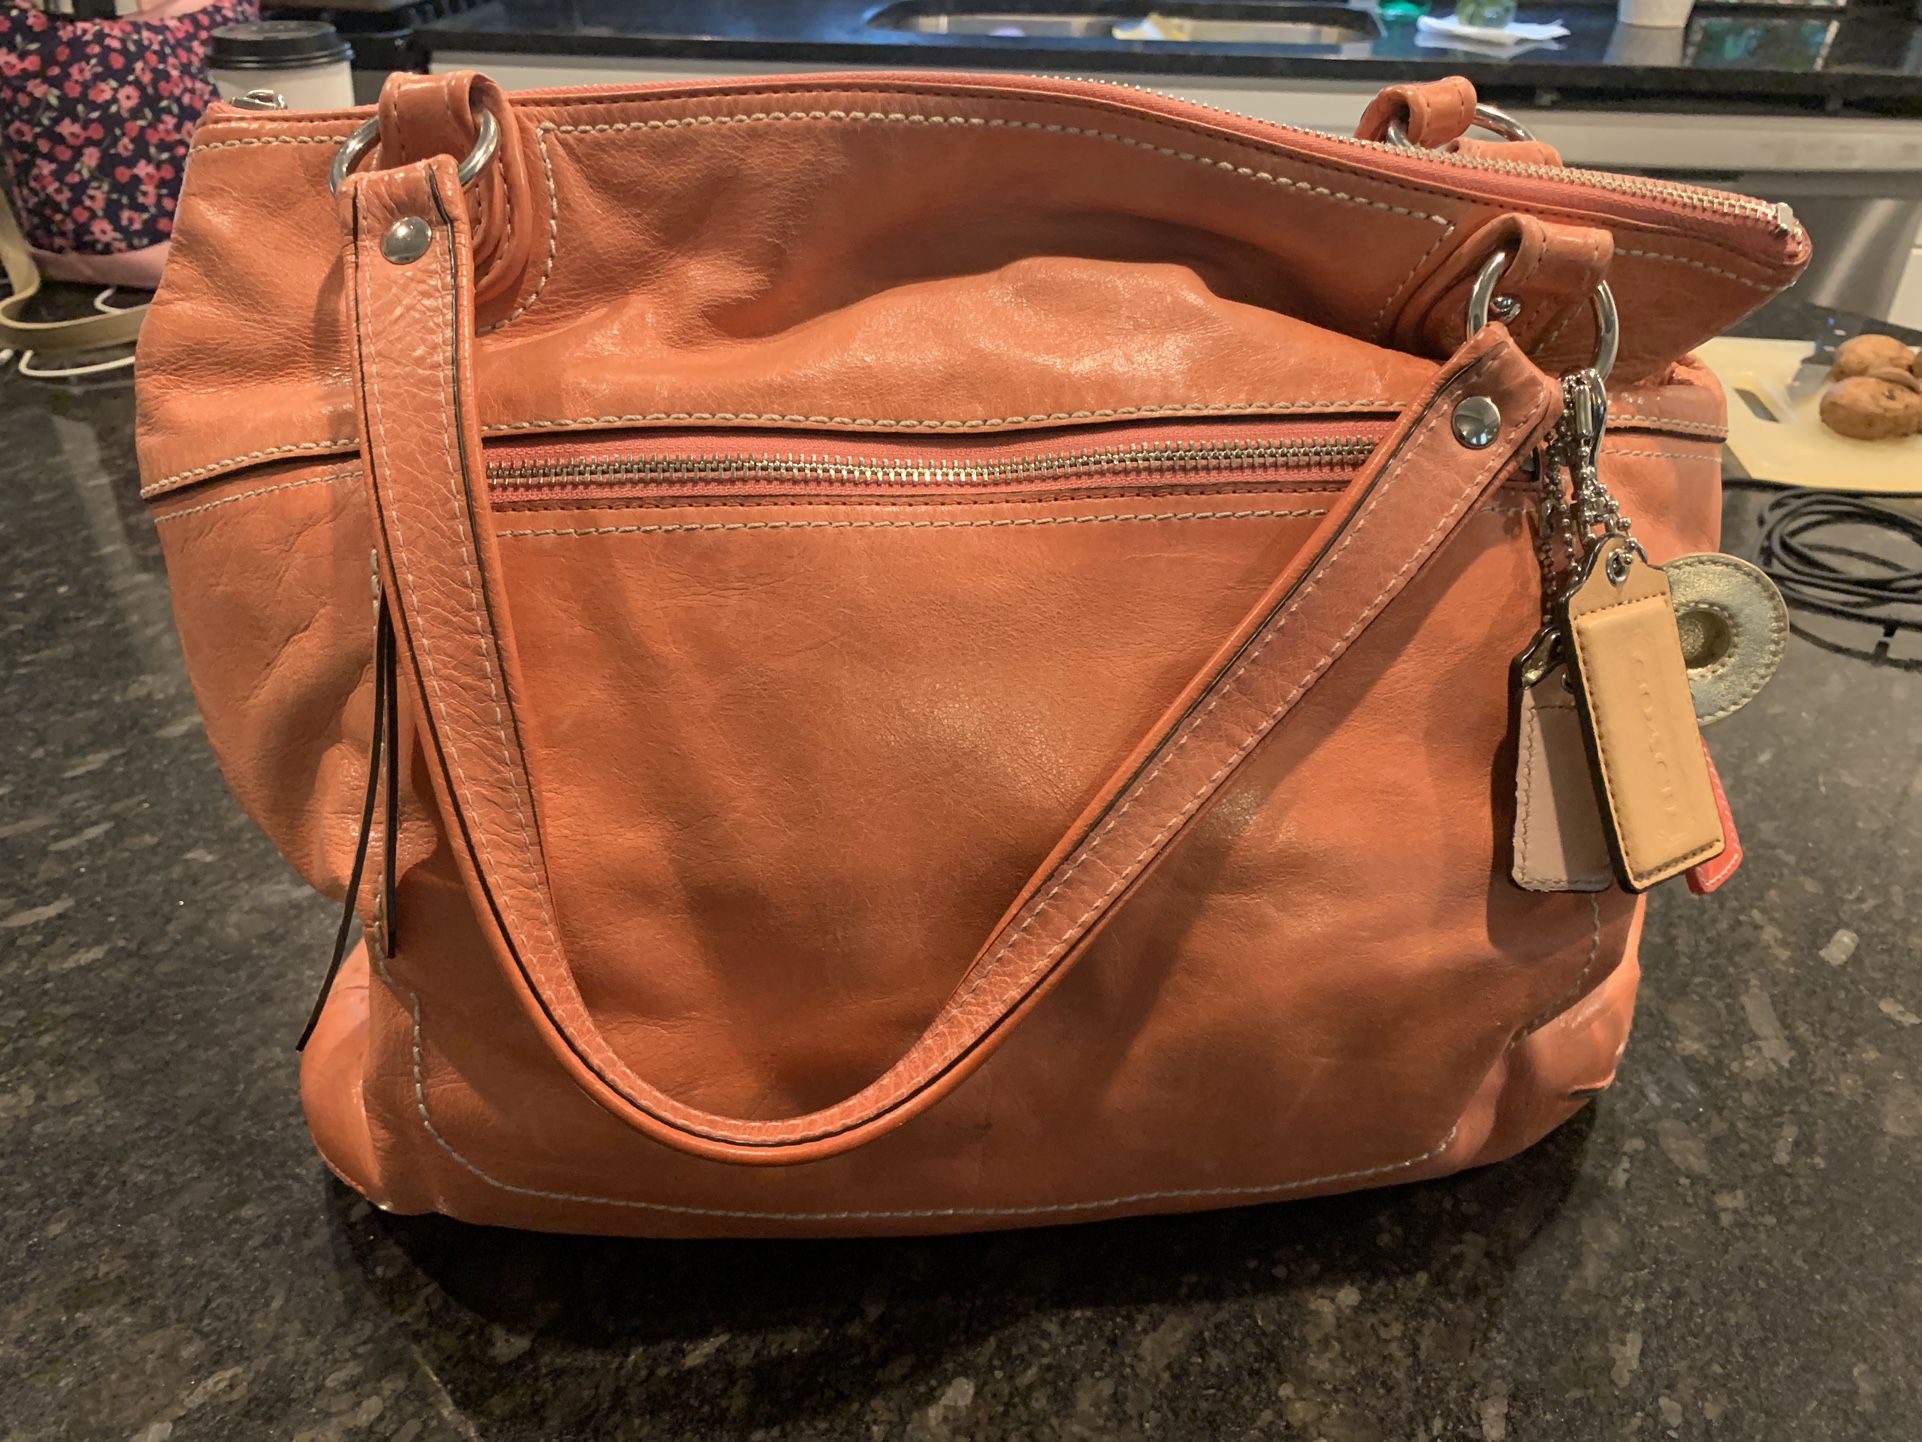 Coach Coral Colored Bag